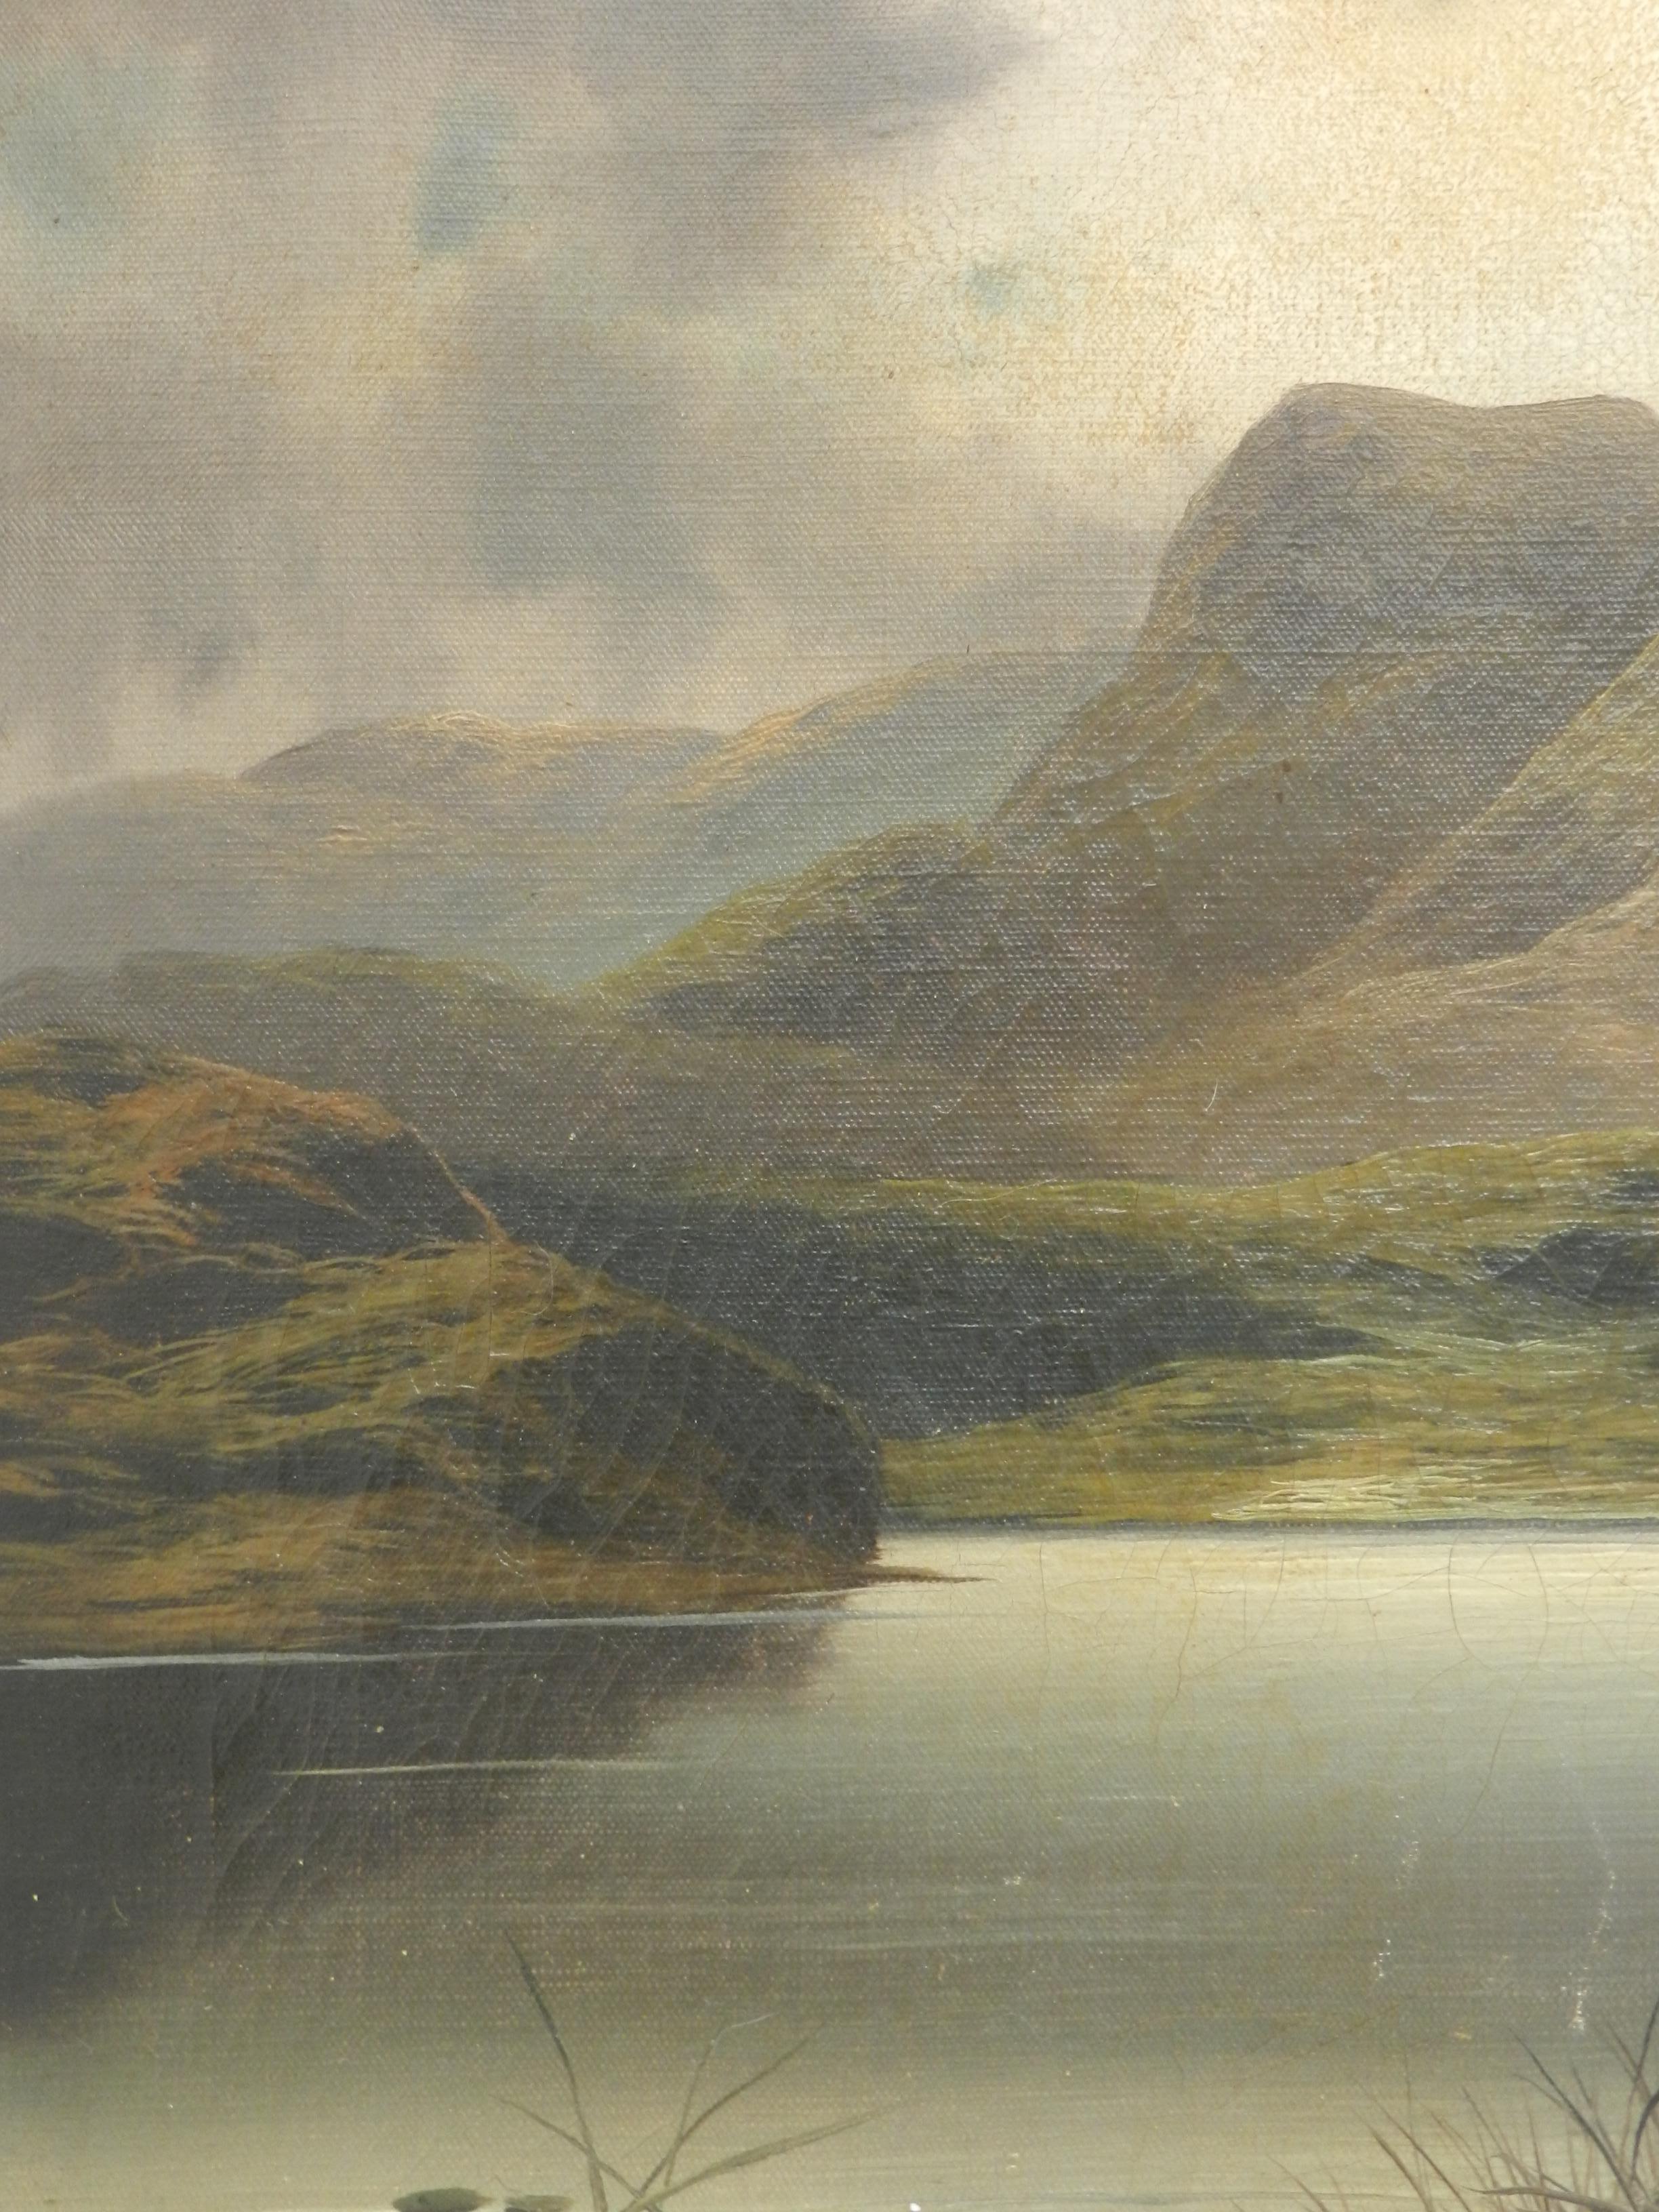 Scottish Highland Lochs by A Hicks late 19th Century 
This artist specialised in Highland Lochs (a pair sold in Christies) 
Good condition with minor signs of age and use





